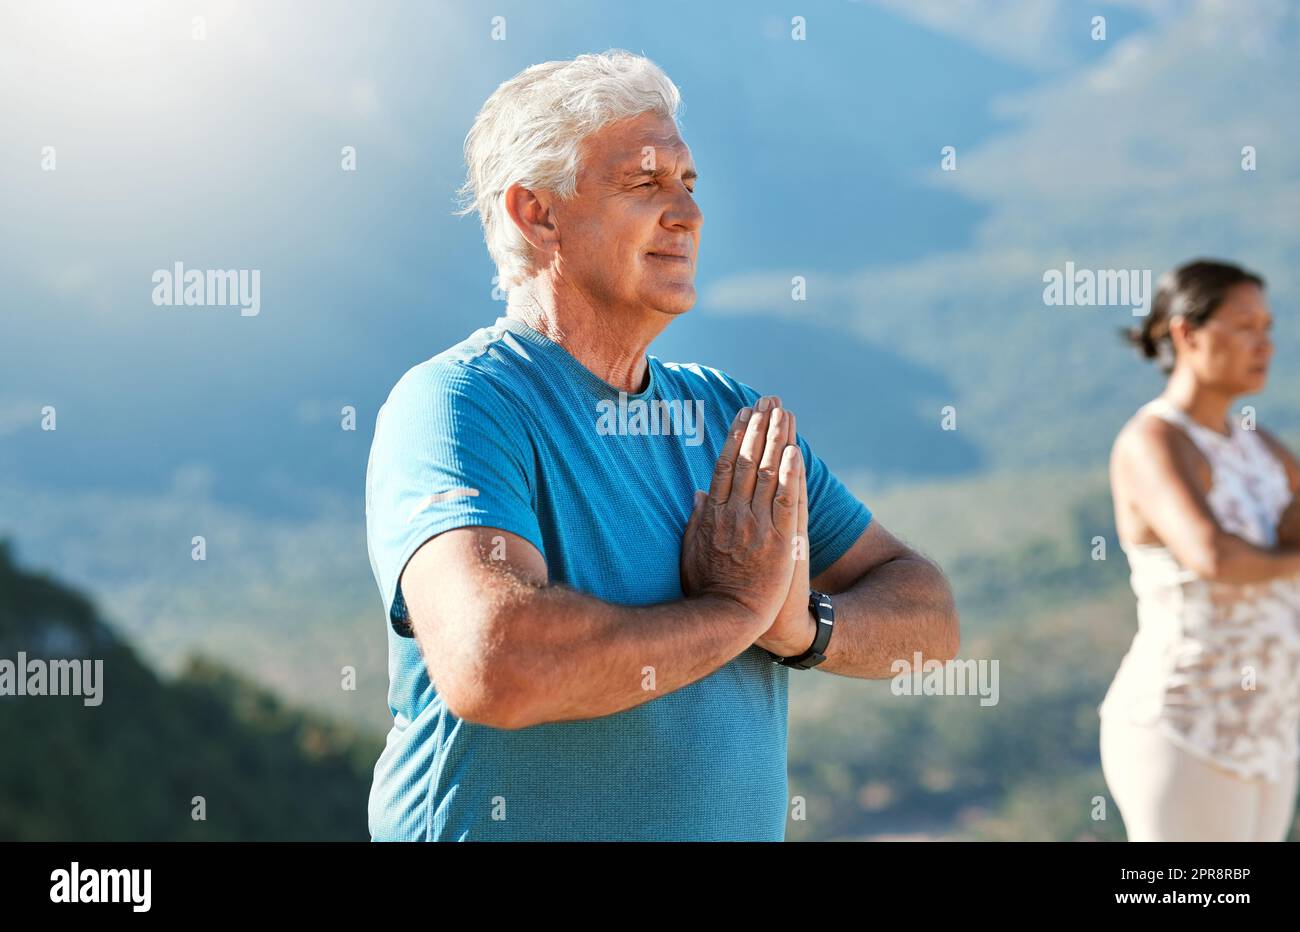 Senior man meditating with joined hands and closed eyes breathing deeply. Mature people doing yoga in nature living a healthy active lifestyle in retirement Stock Photo